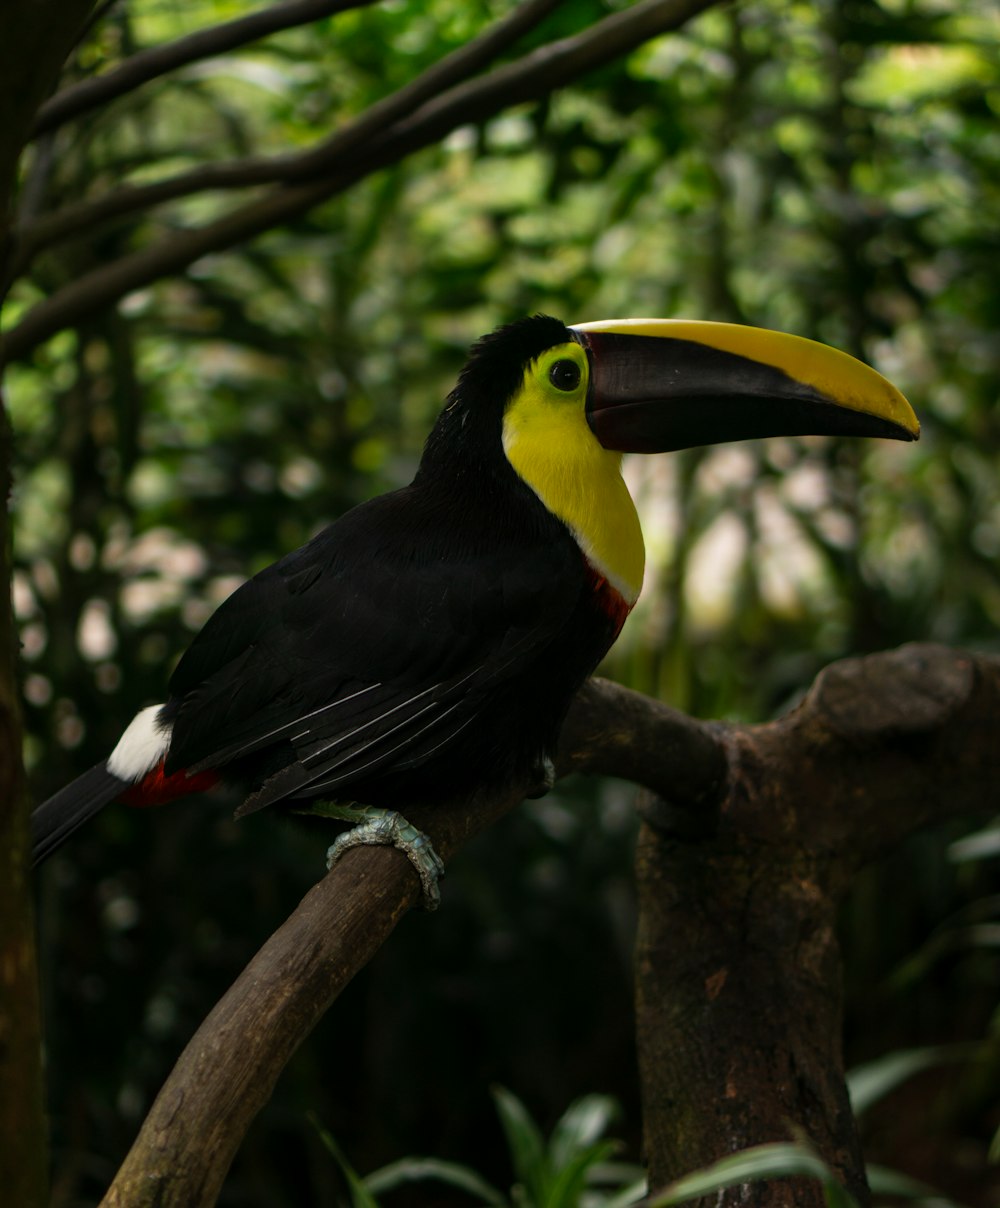 black and yellow bird standing on branch